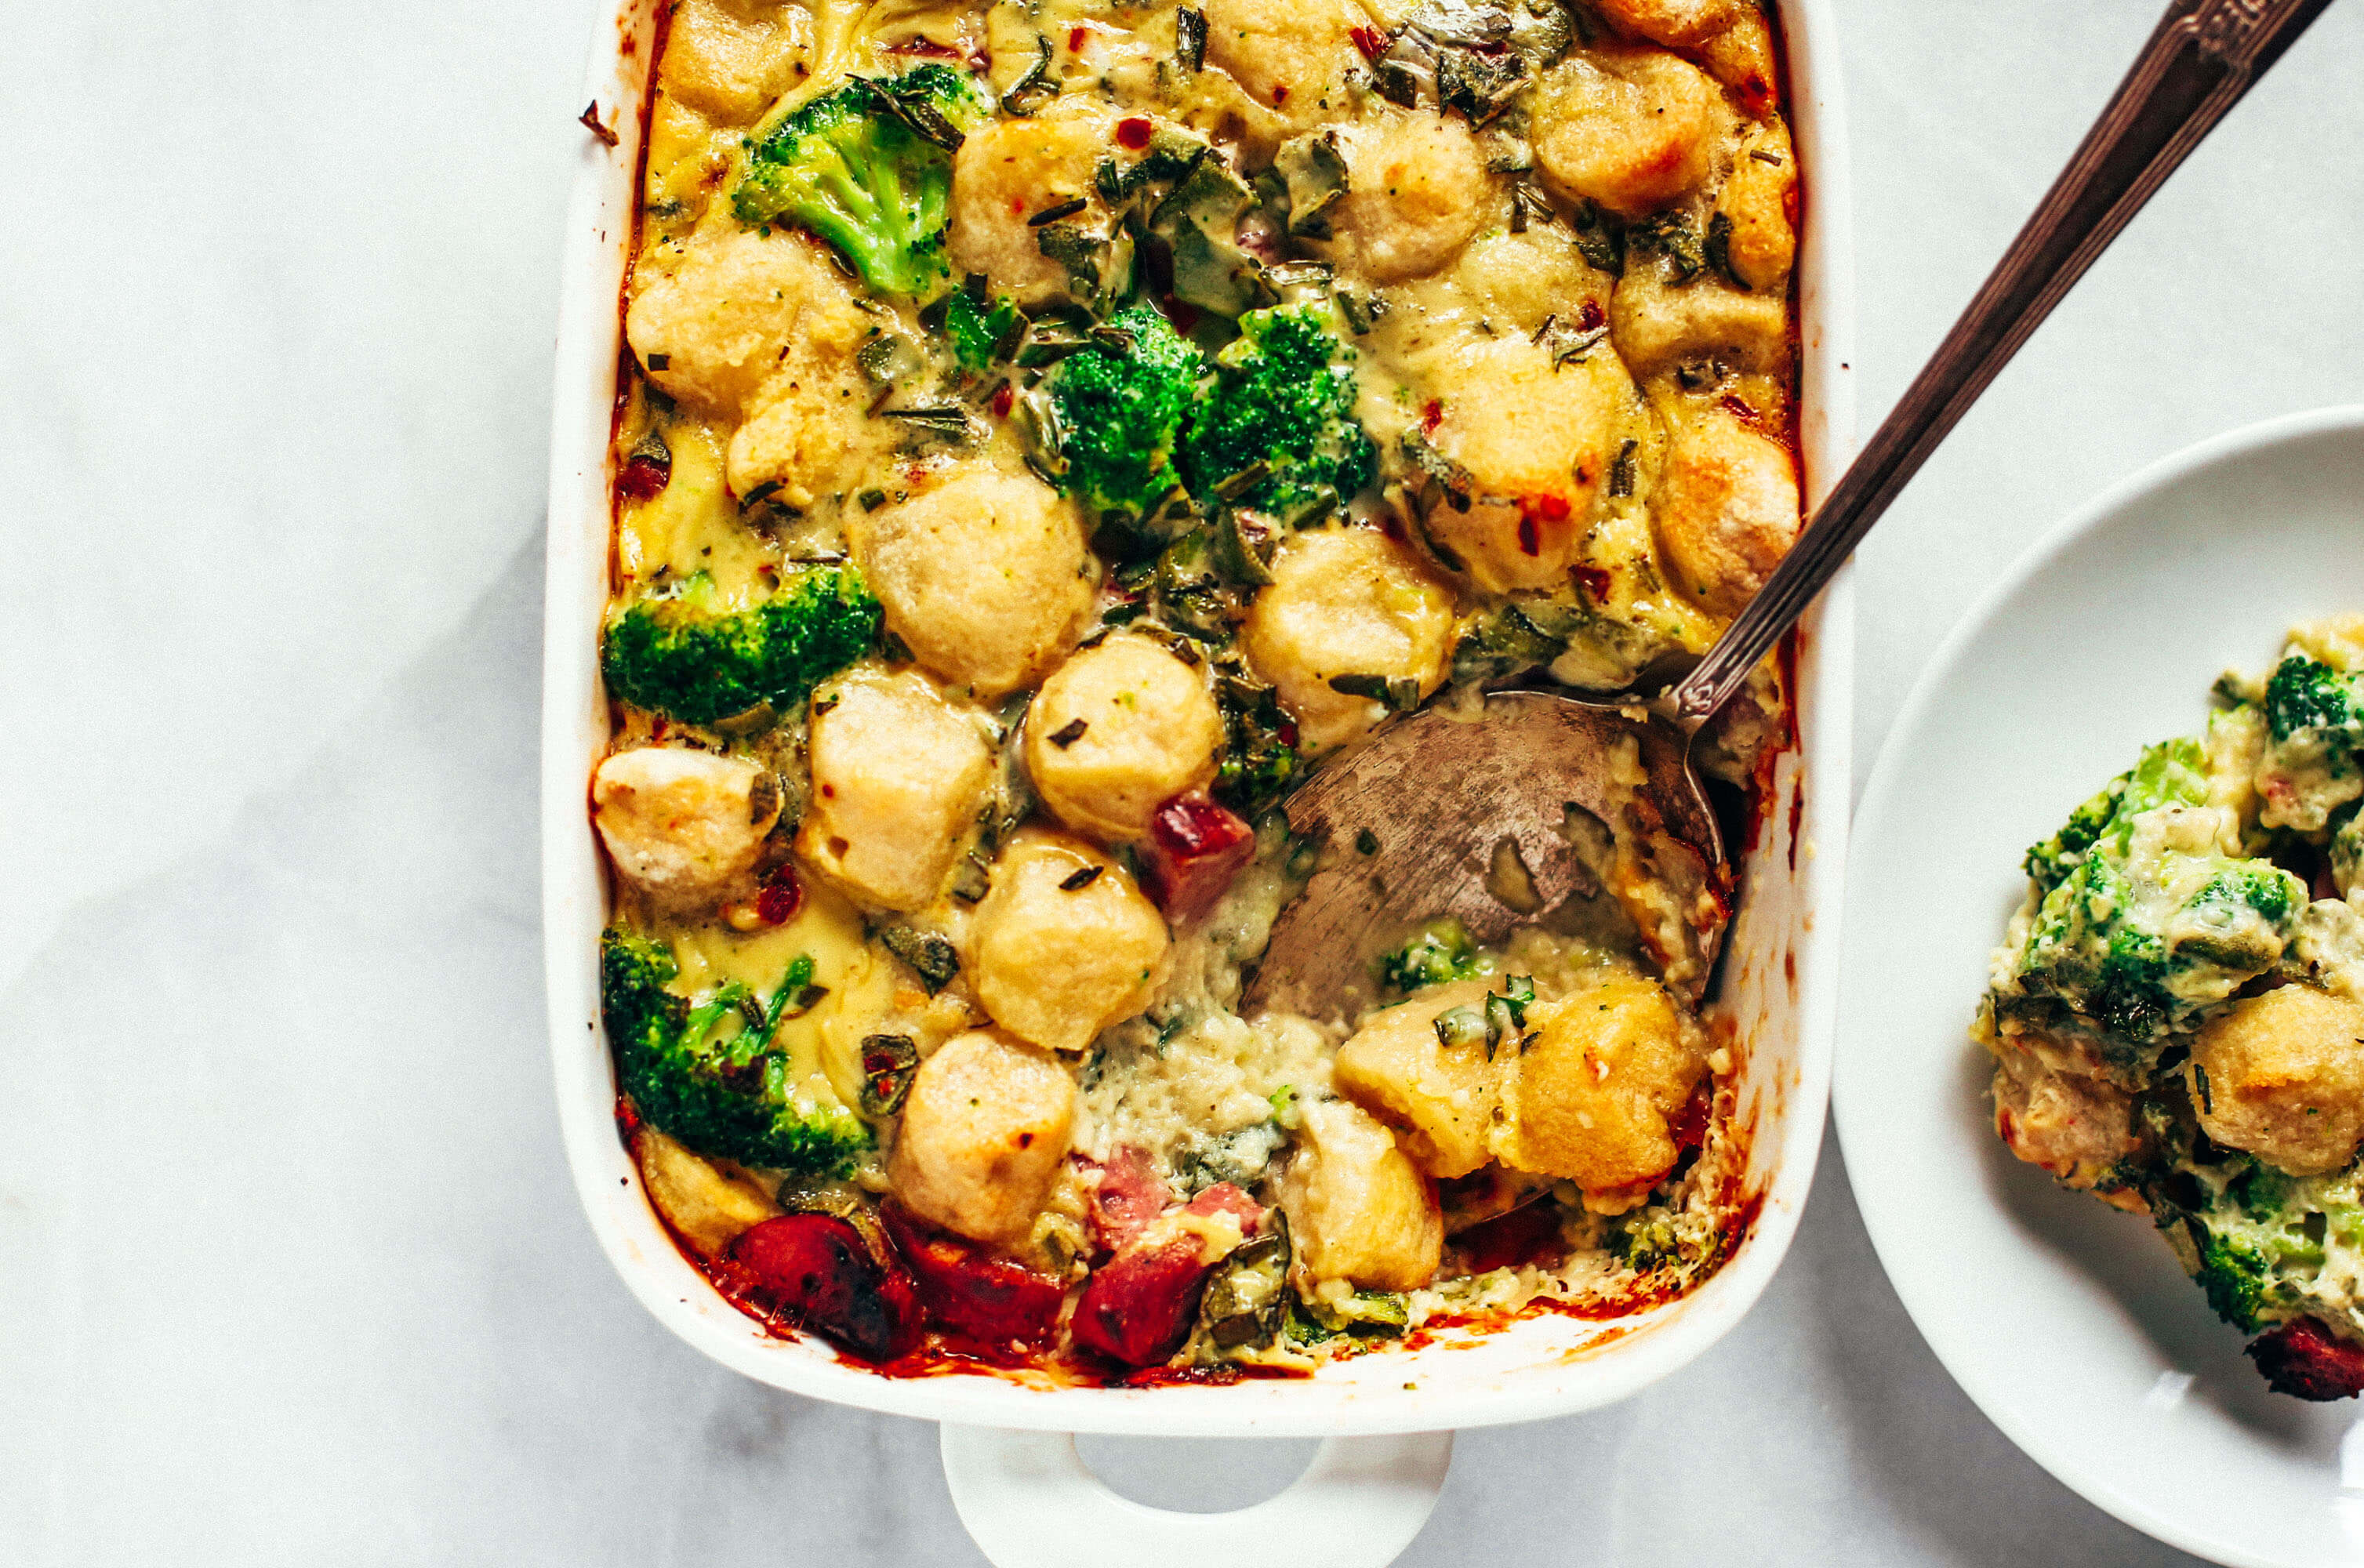 Baked cauliflower gnocchi casserole- made with homemade two ingredient cauliflower gnocchi and rosemary sage cream sauce. Paleo, gluten free, and dairy free family dinner. This casserole is perfect for breakfast or dinner! Easy whole30 dinner recipes. Whole30 meal prep. Best paleo dinners. #paleo